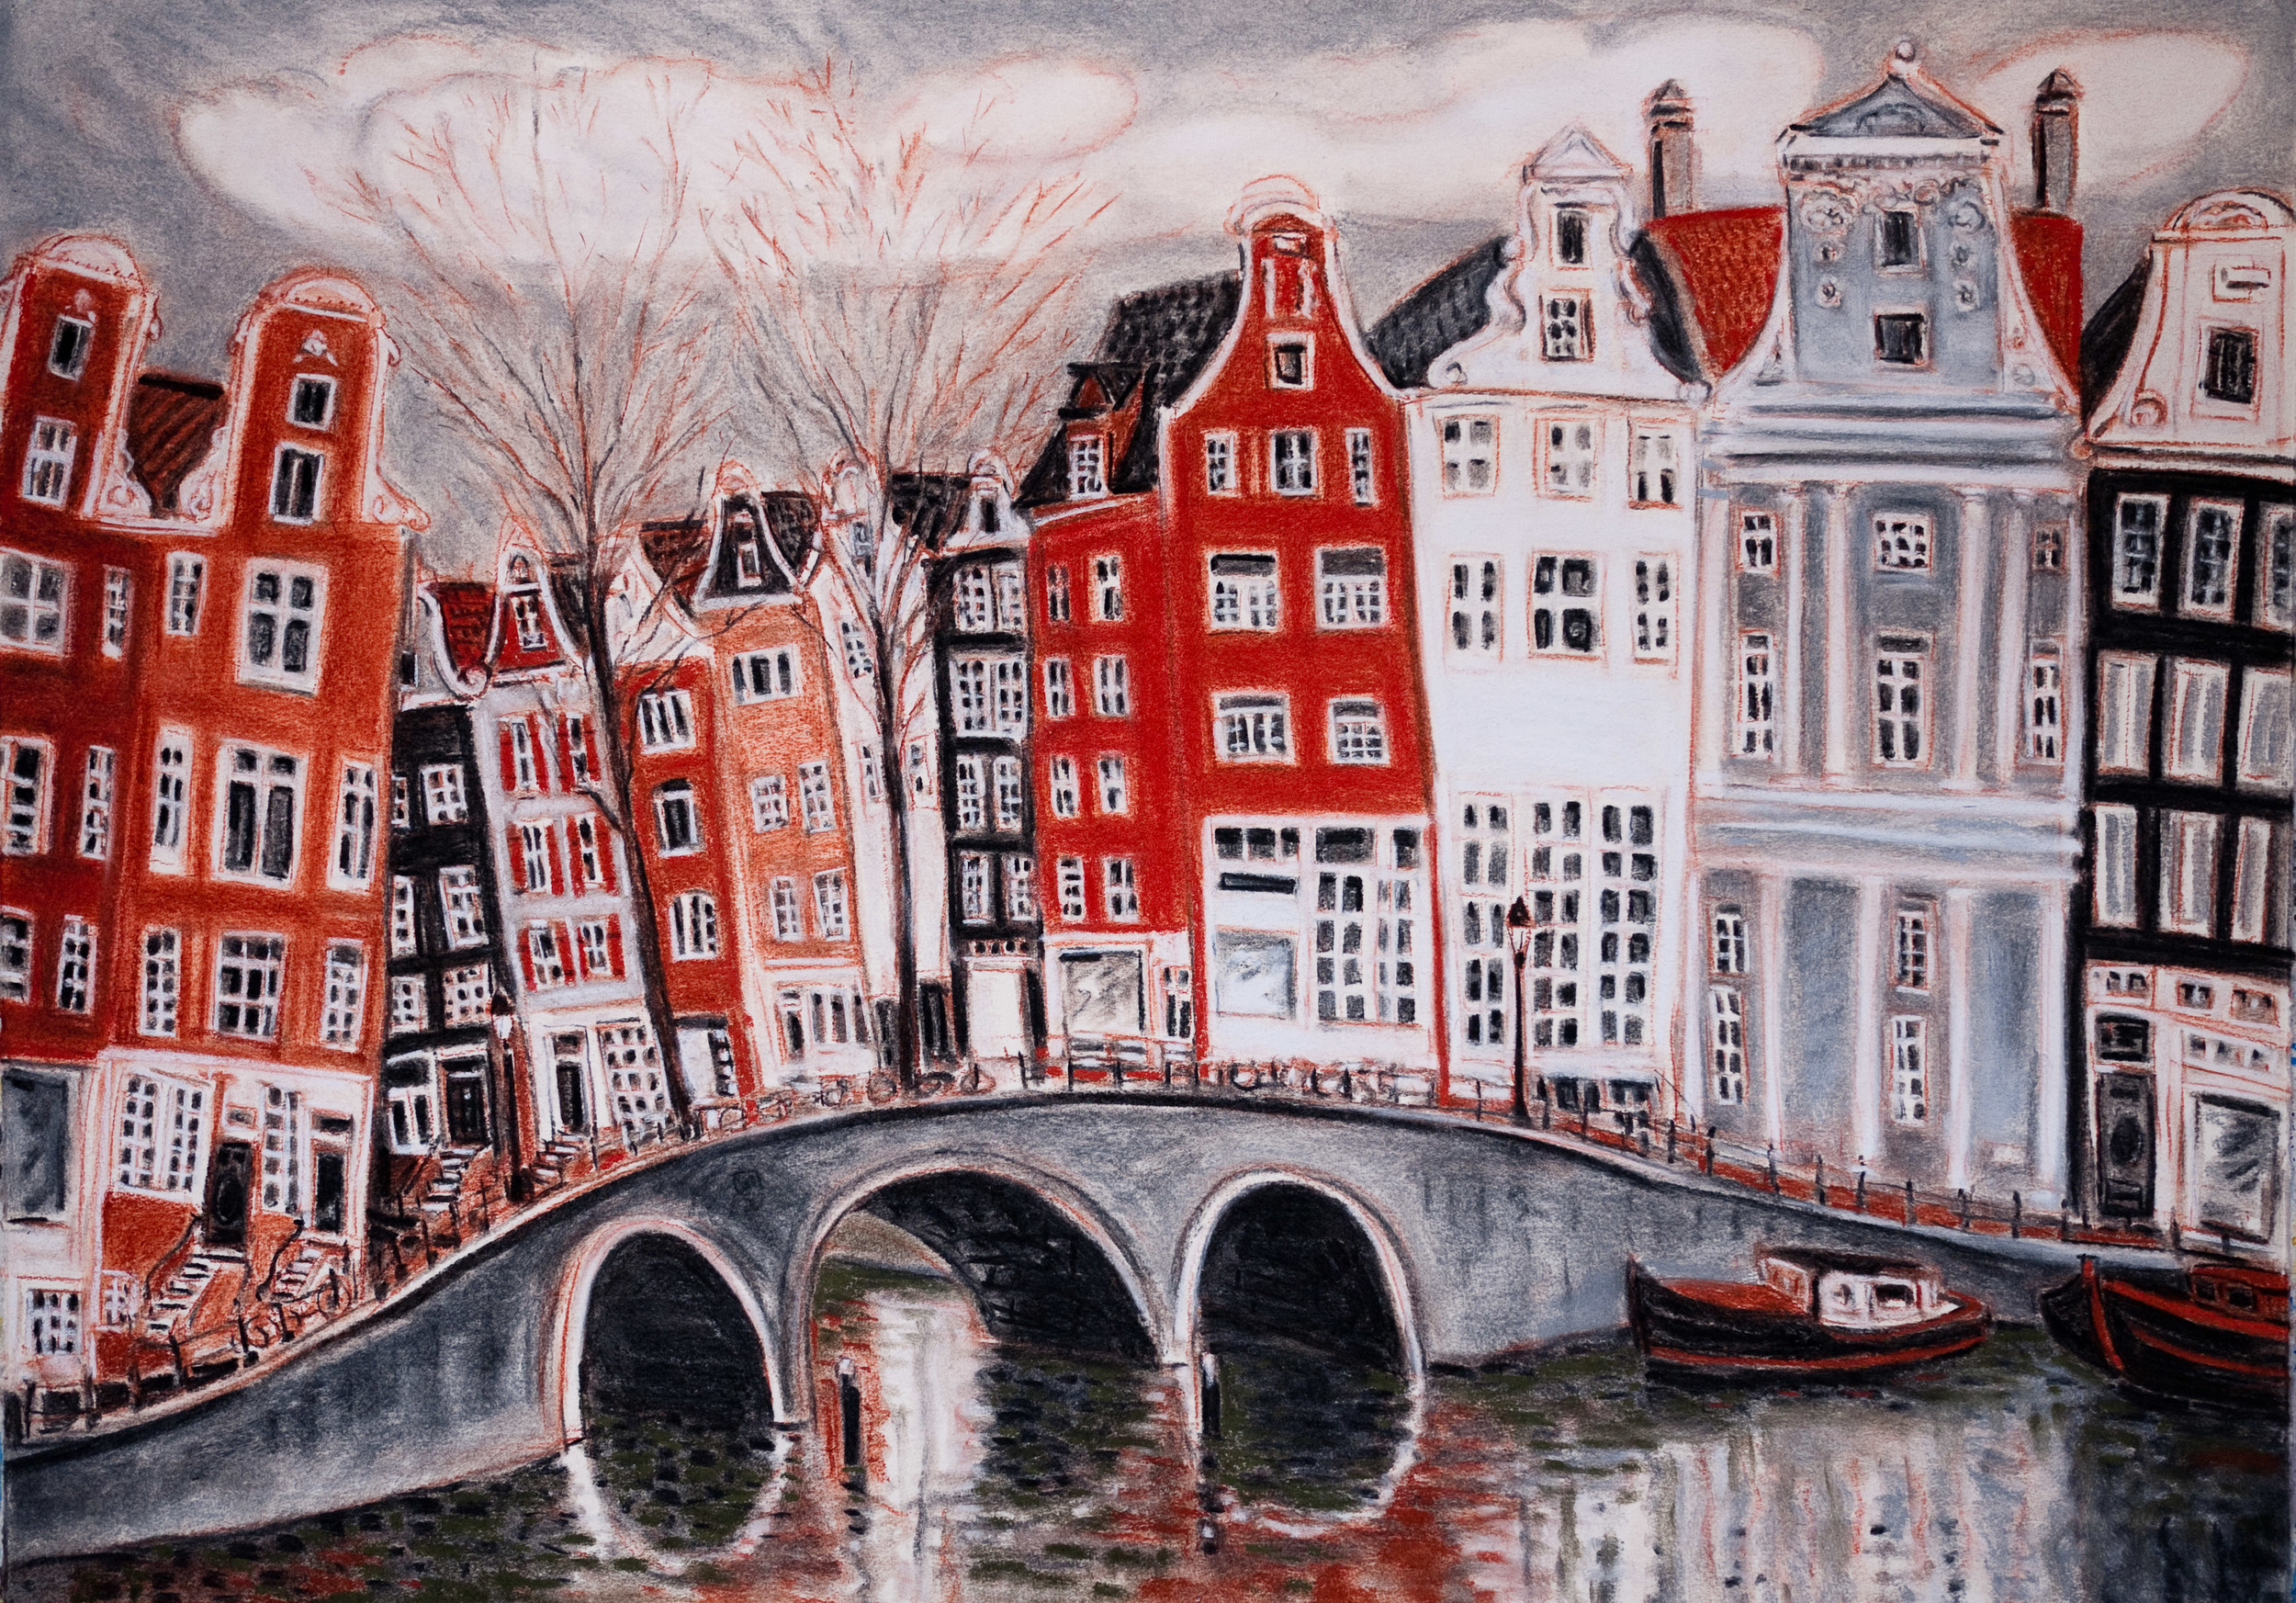 Amsterdam Canals, Prinsengracht Canal #2, pastel 22x30